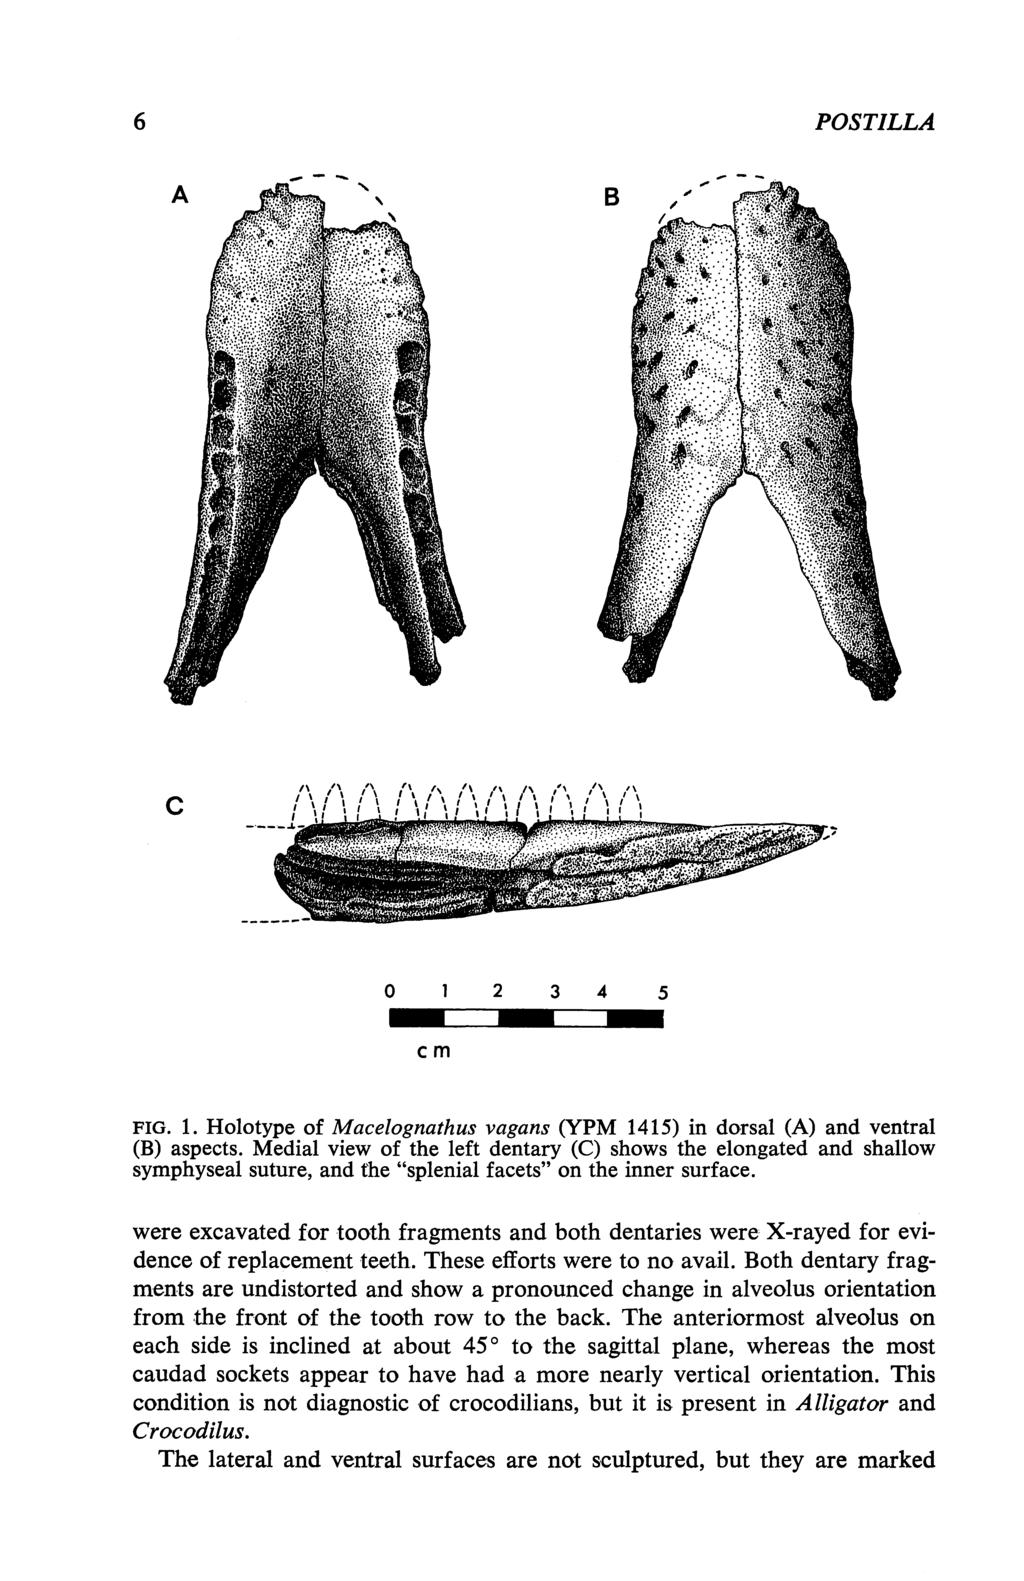 6 POSTILLA c m FIG. 1. Holotype of Macelognathus vagans (YPM 1415) in dorsal (A) and ventral (B) aspects.